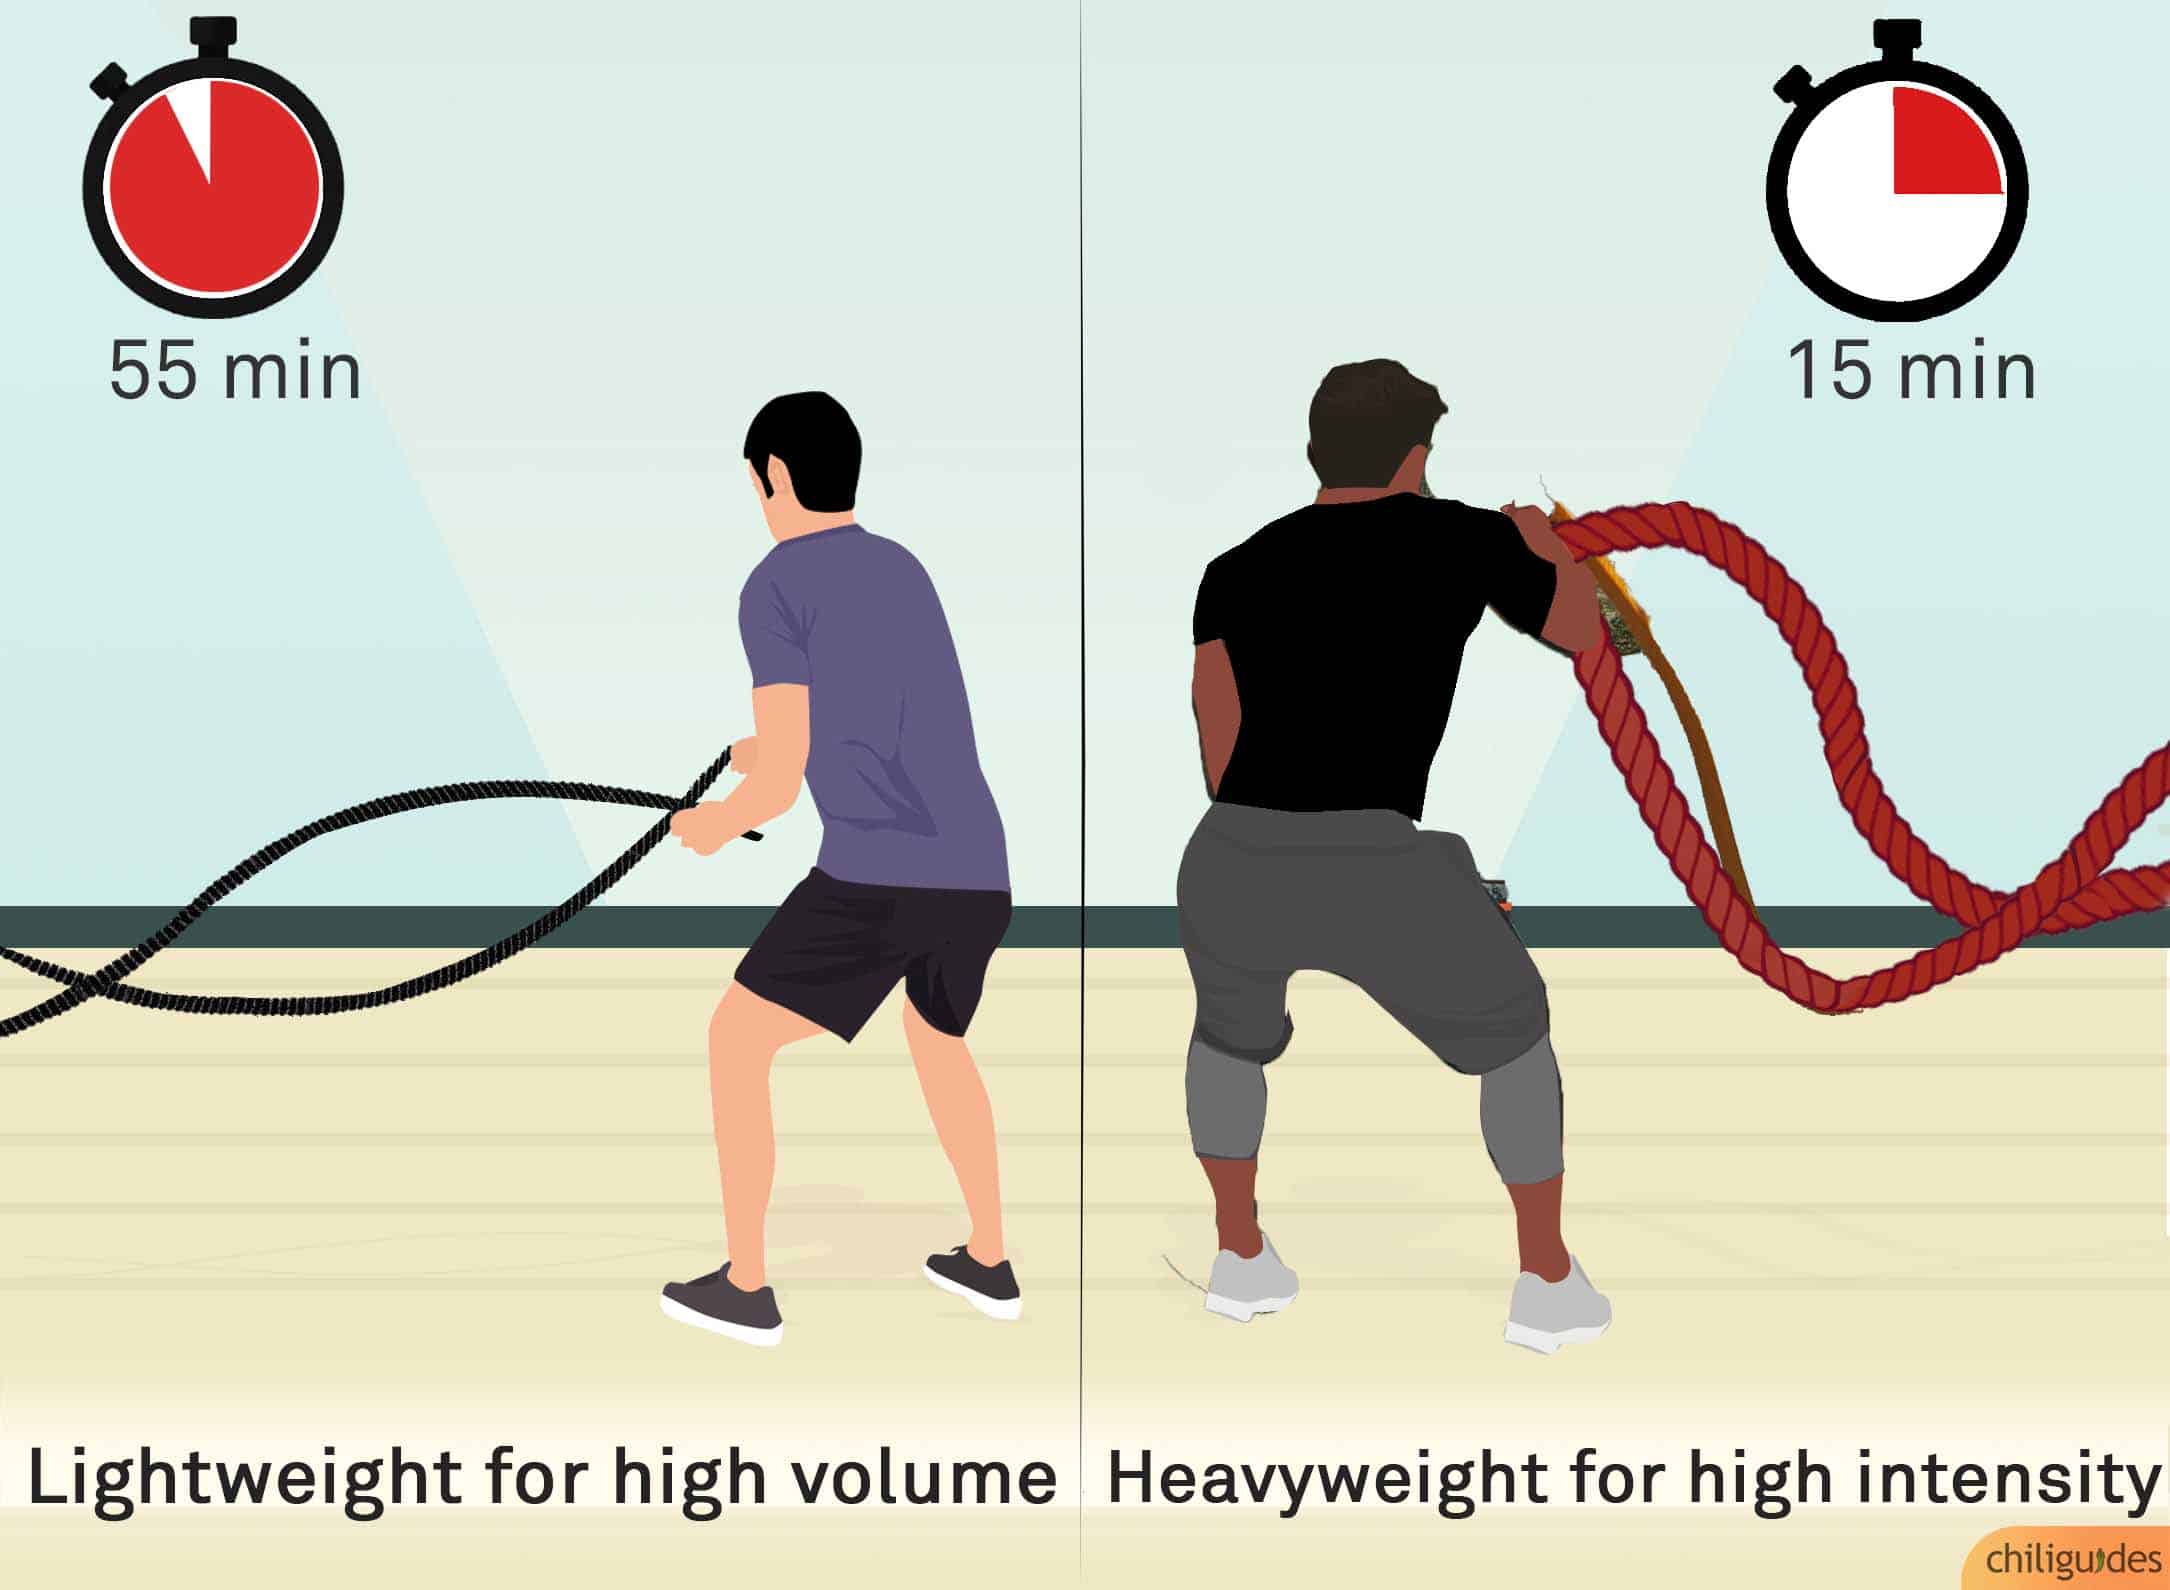 Buy lightweight ropes for high volume, and heavy ropes for high intensity.